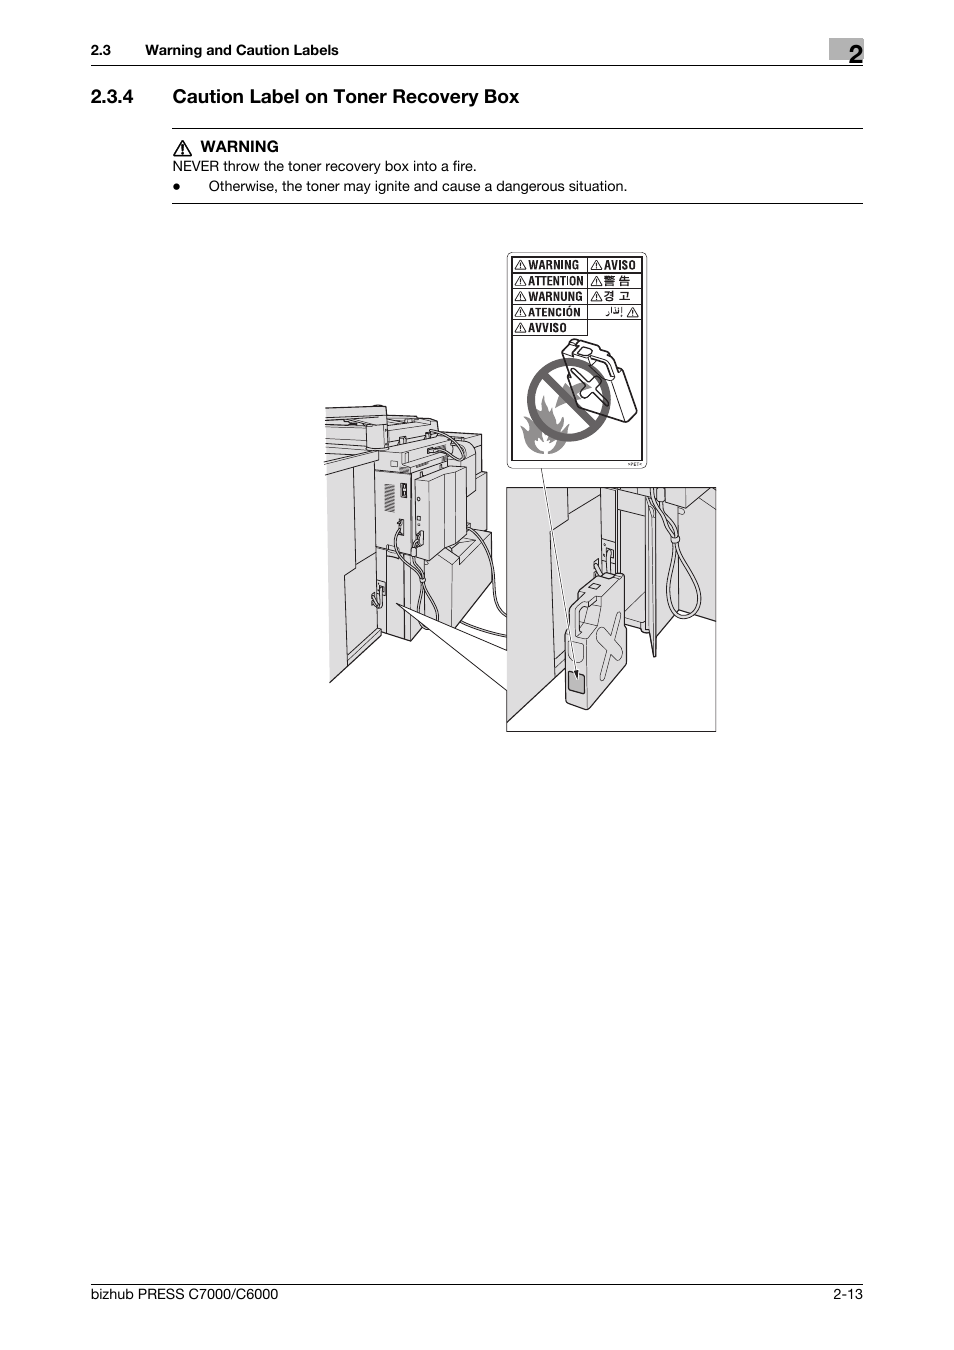 4 caution label on toner recovery box, Caution label on toner recovery box -13 | Konica Minolta bizhub PRESS C6000 User Manual | Page 22 / 42